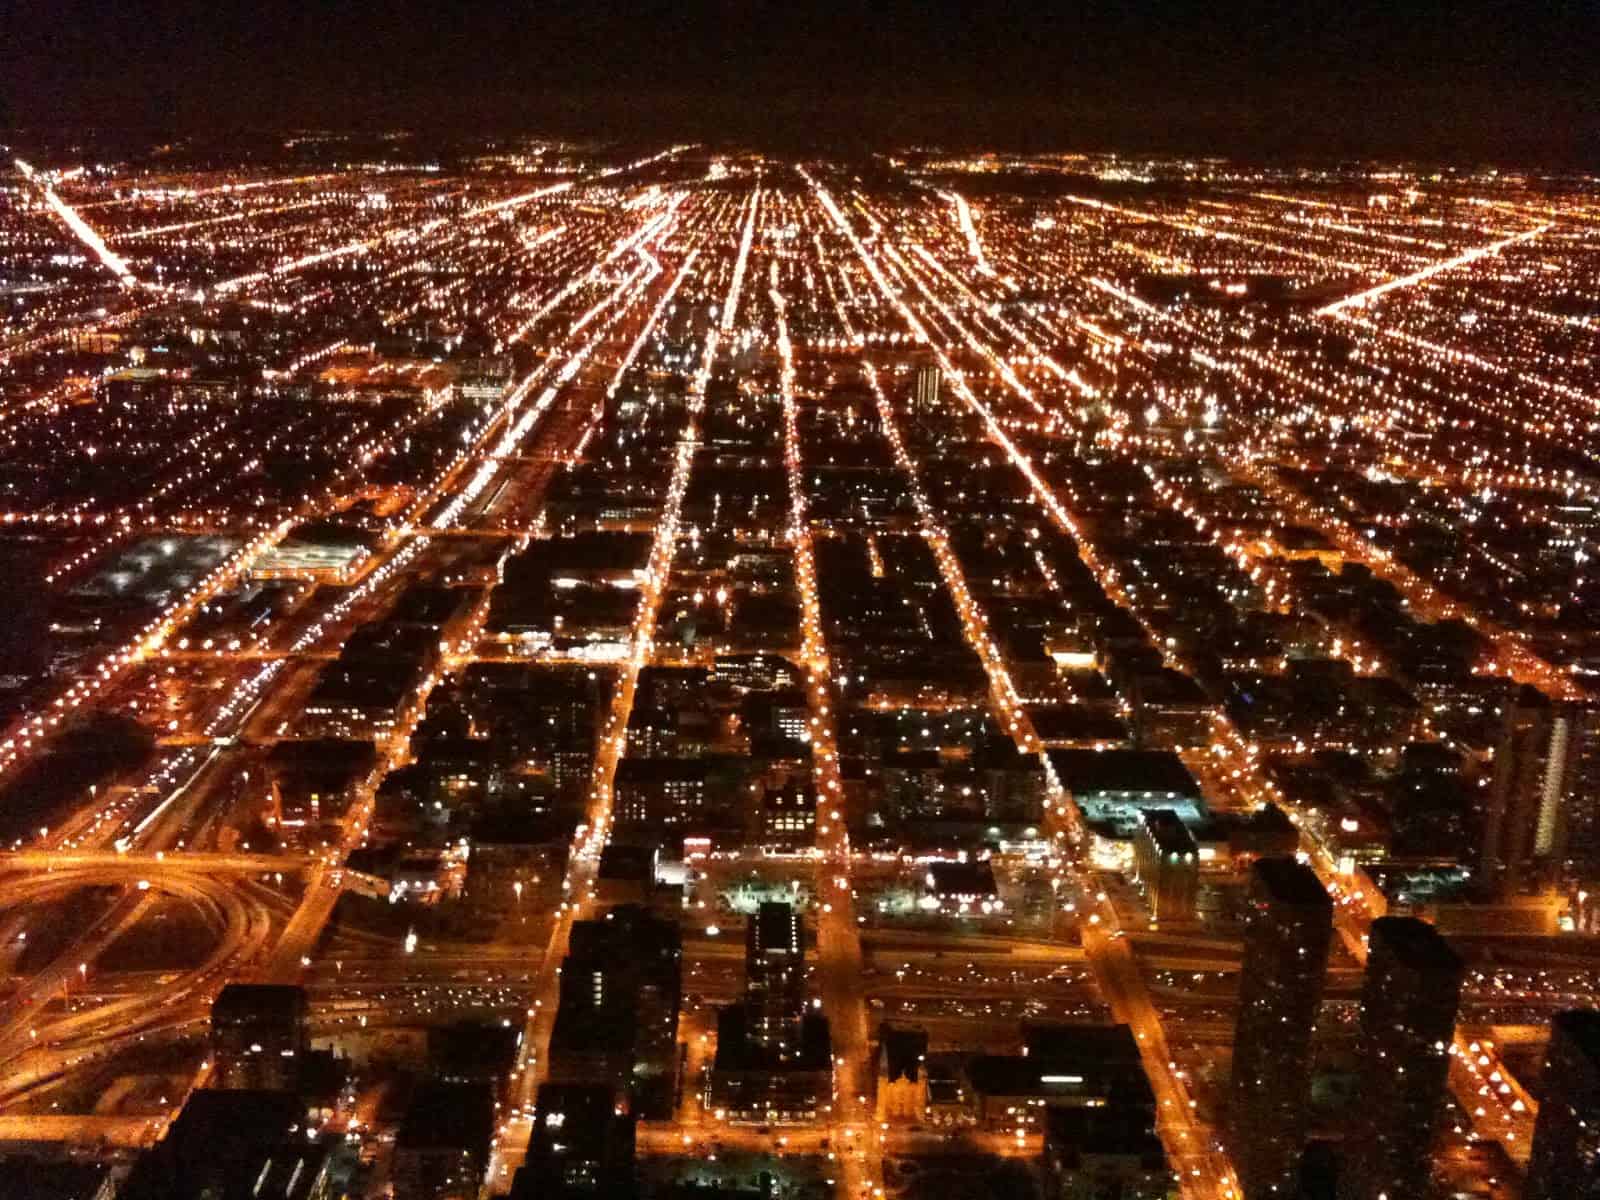 Skydeck at Willis Tower (Sears Tower) in Chicago